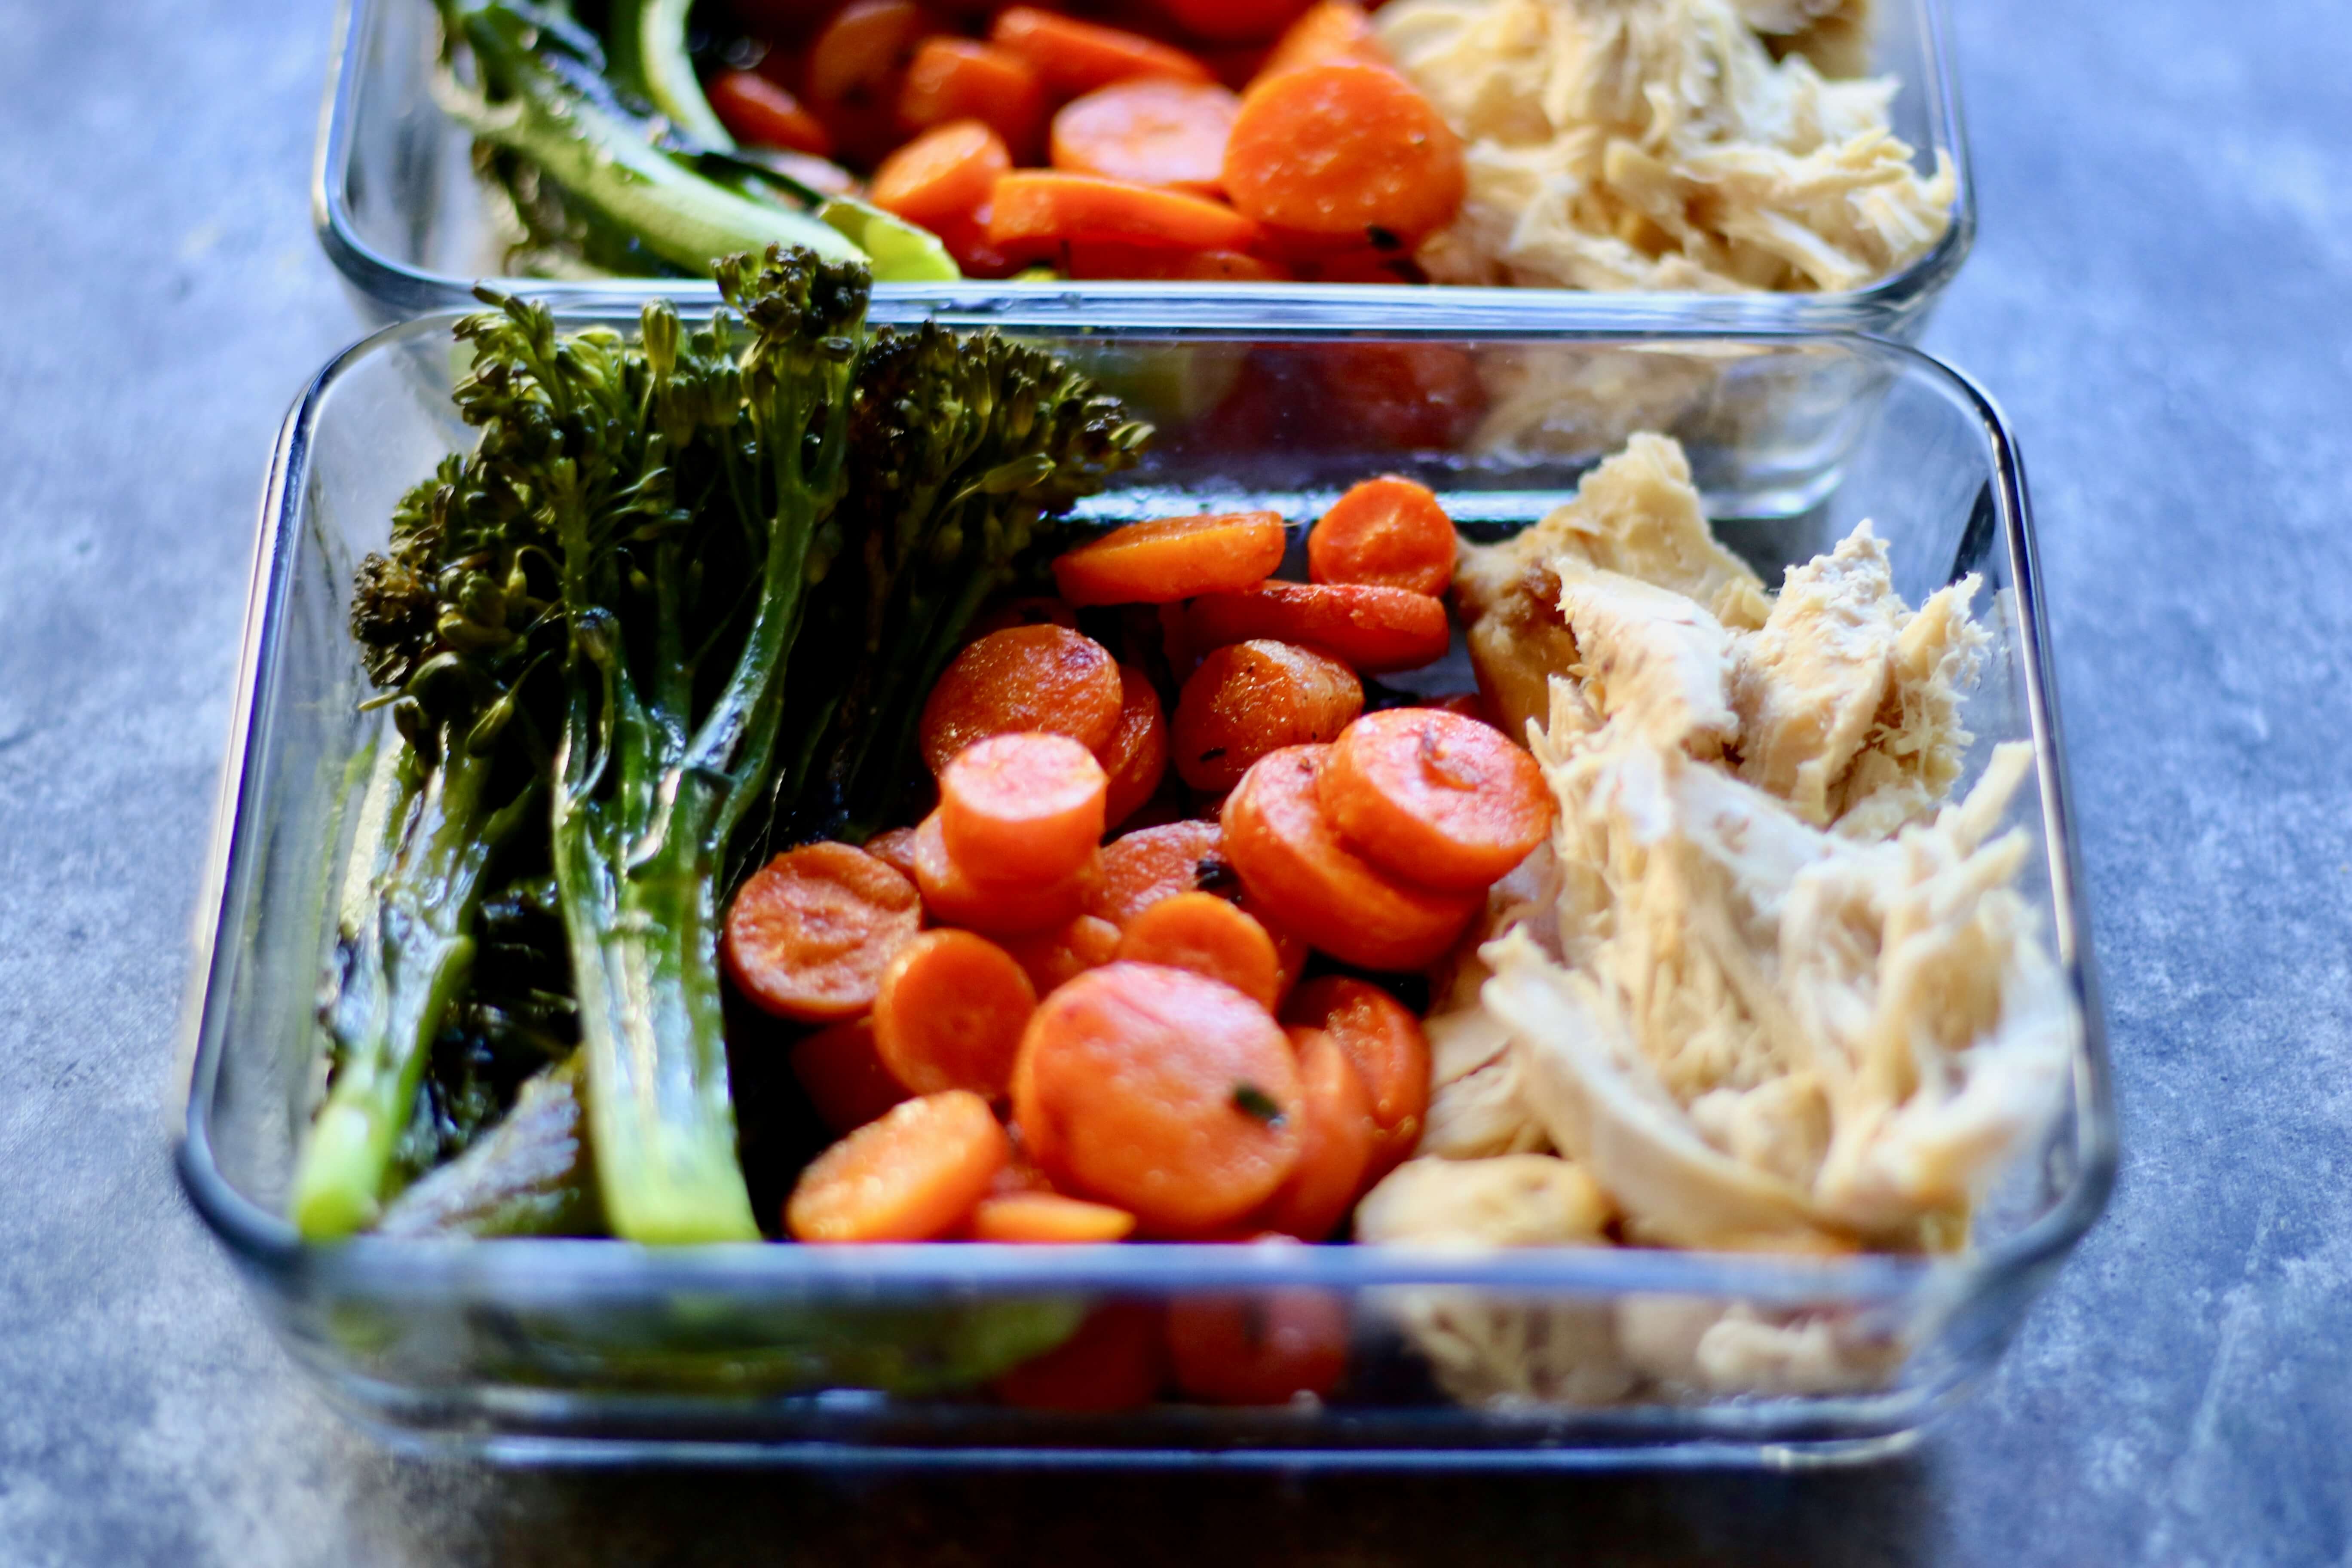 5 Ingredient Meal Ideas Your Clients Will Love: Chicken, Carrots & Broccolini